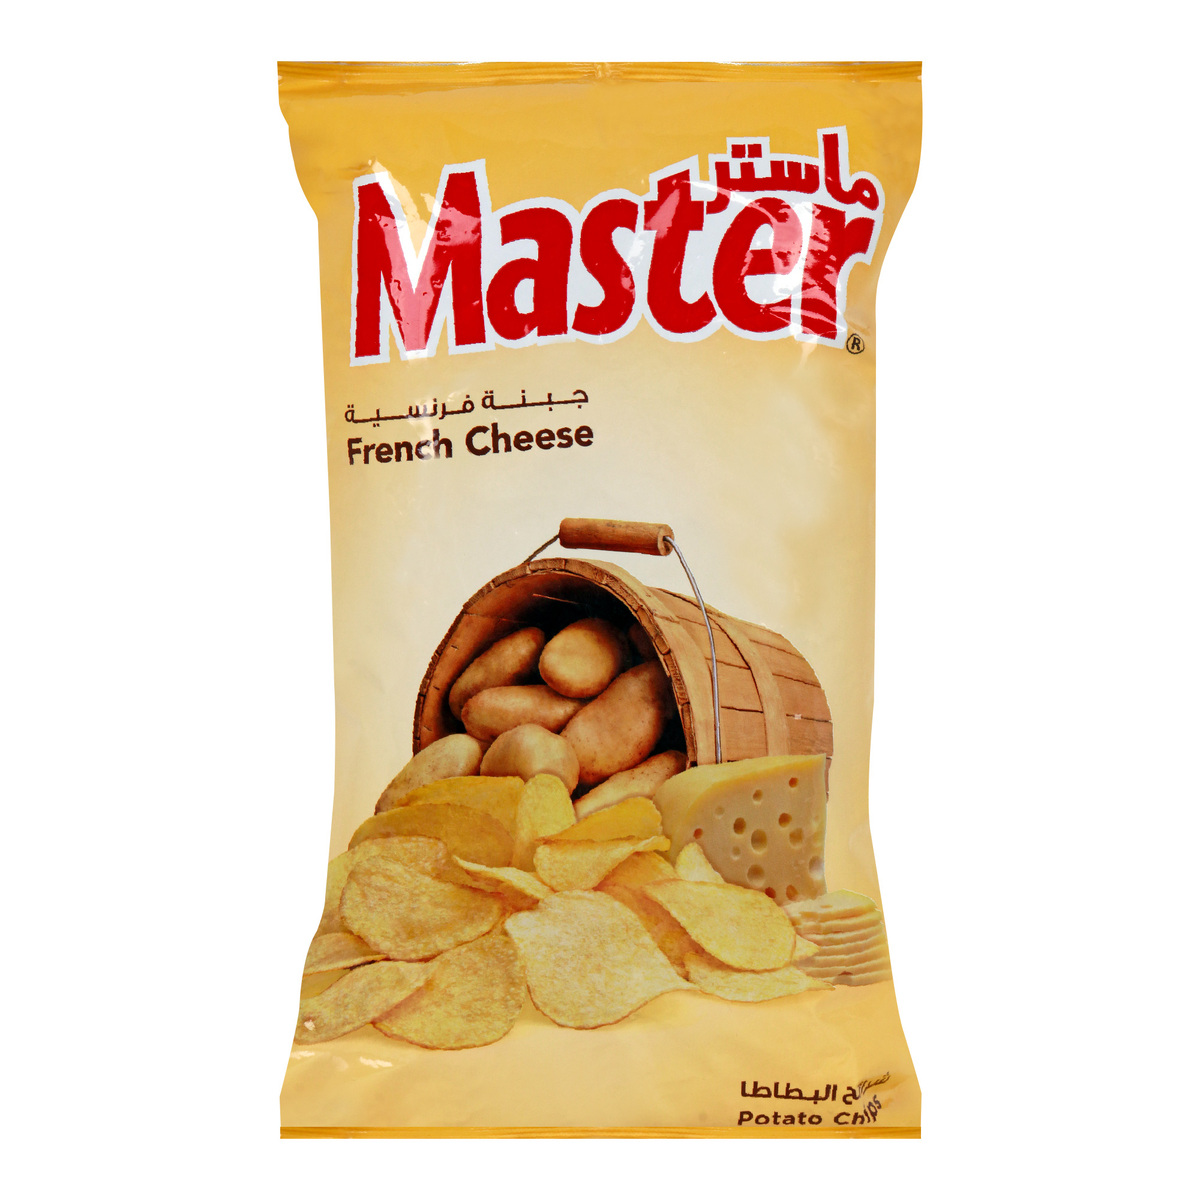 Master Potato Chips French Cheese 150g